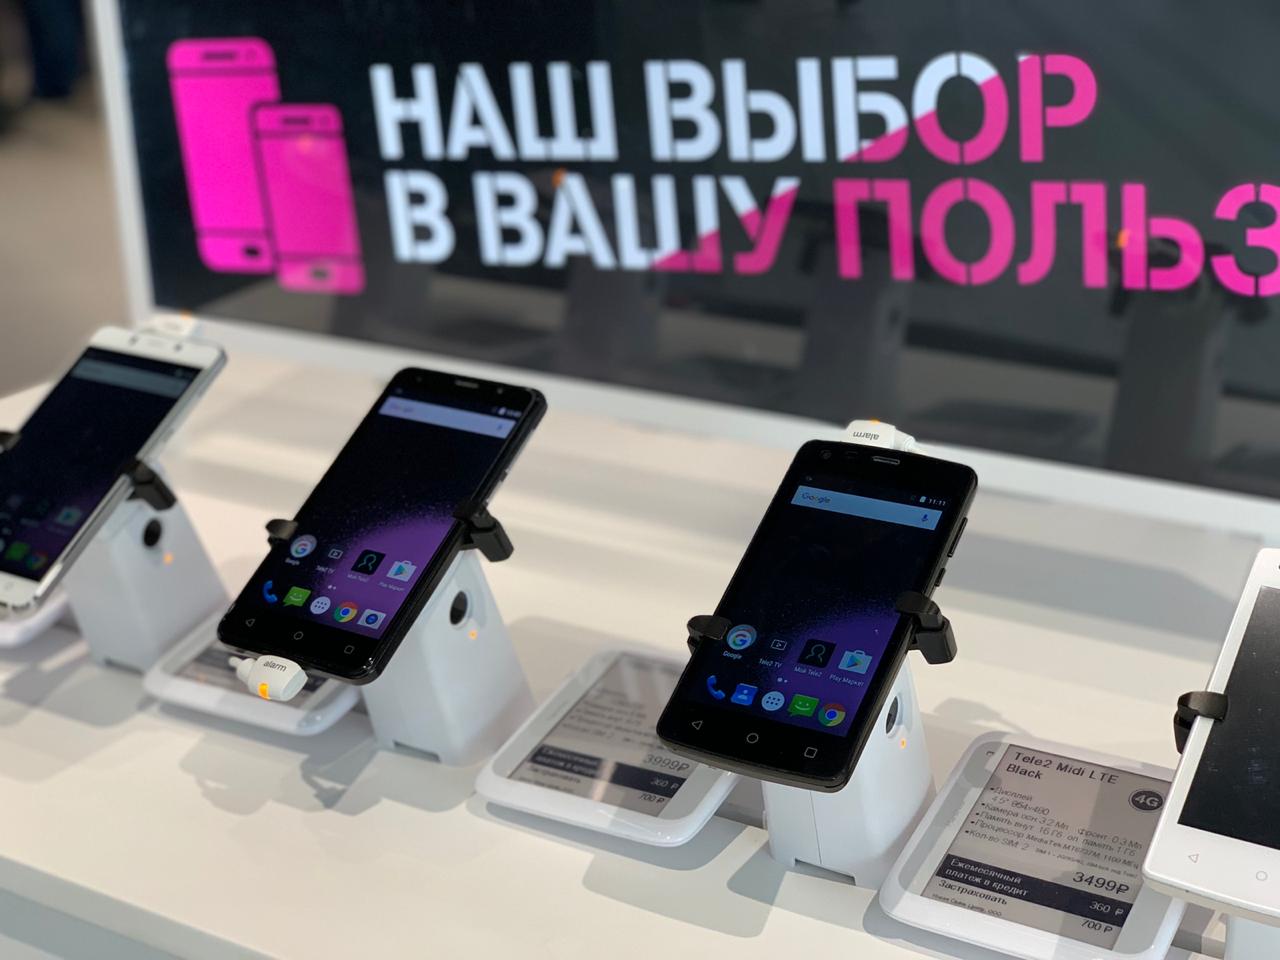 Tele2 Retail offers 1